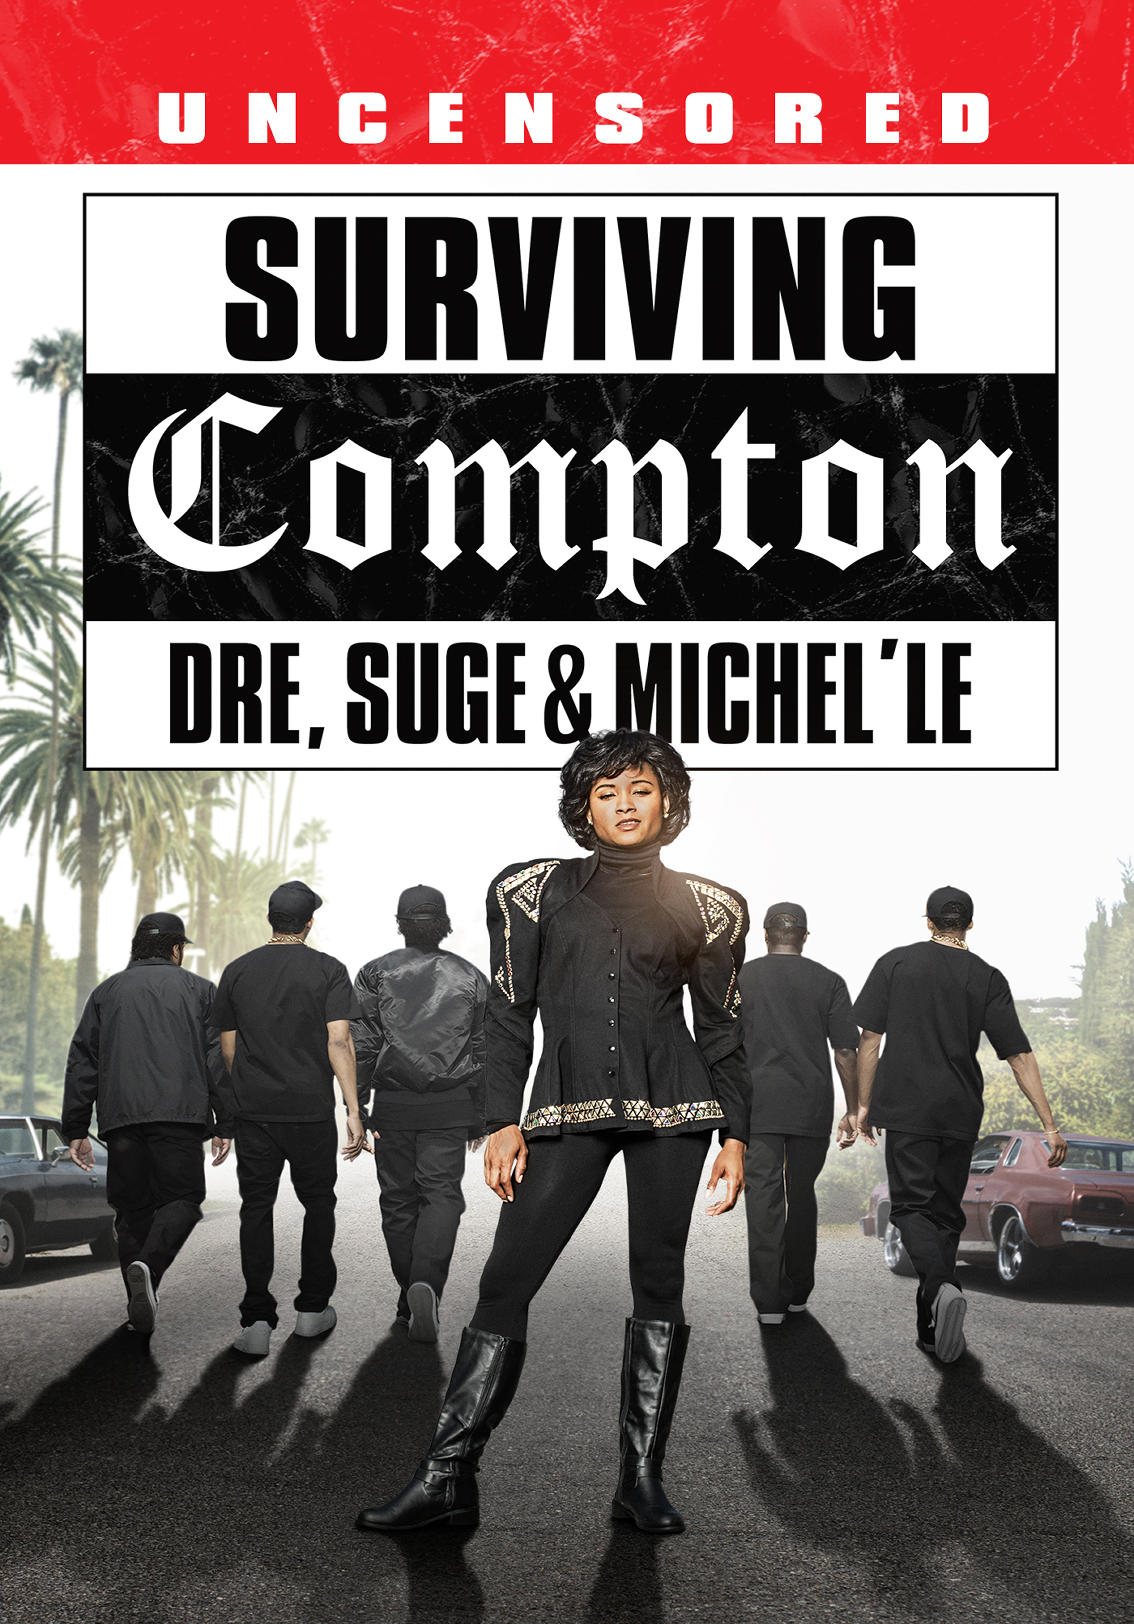 songs from the surviving compton movie